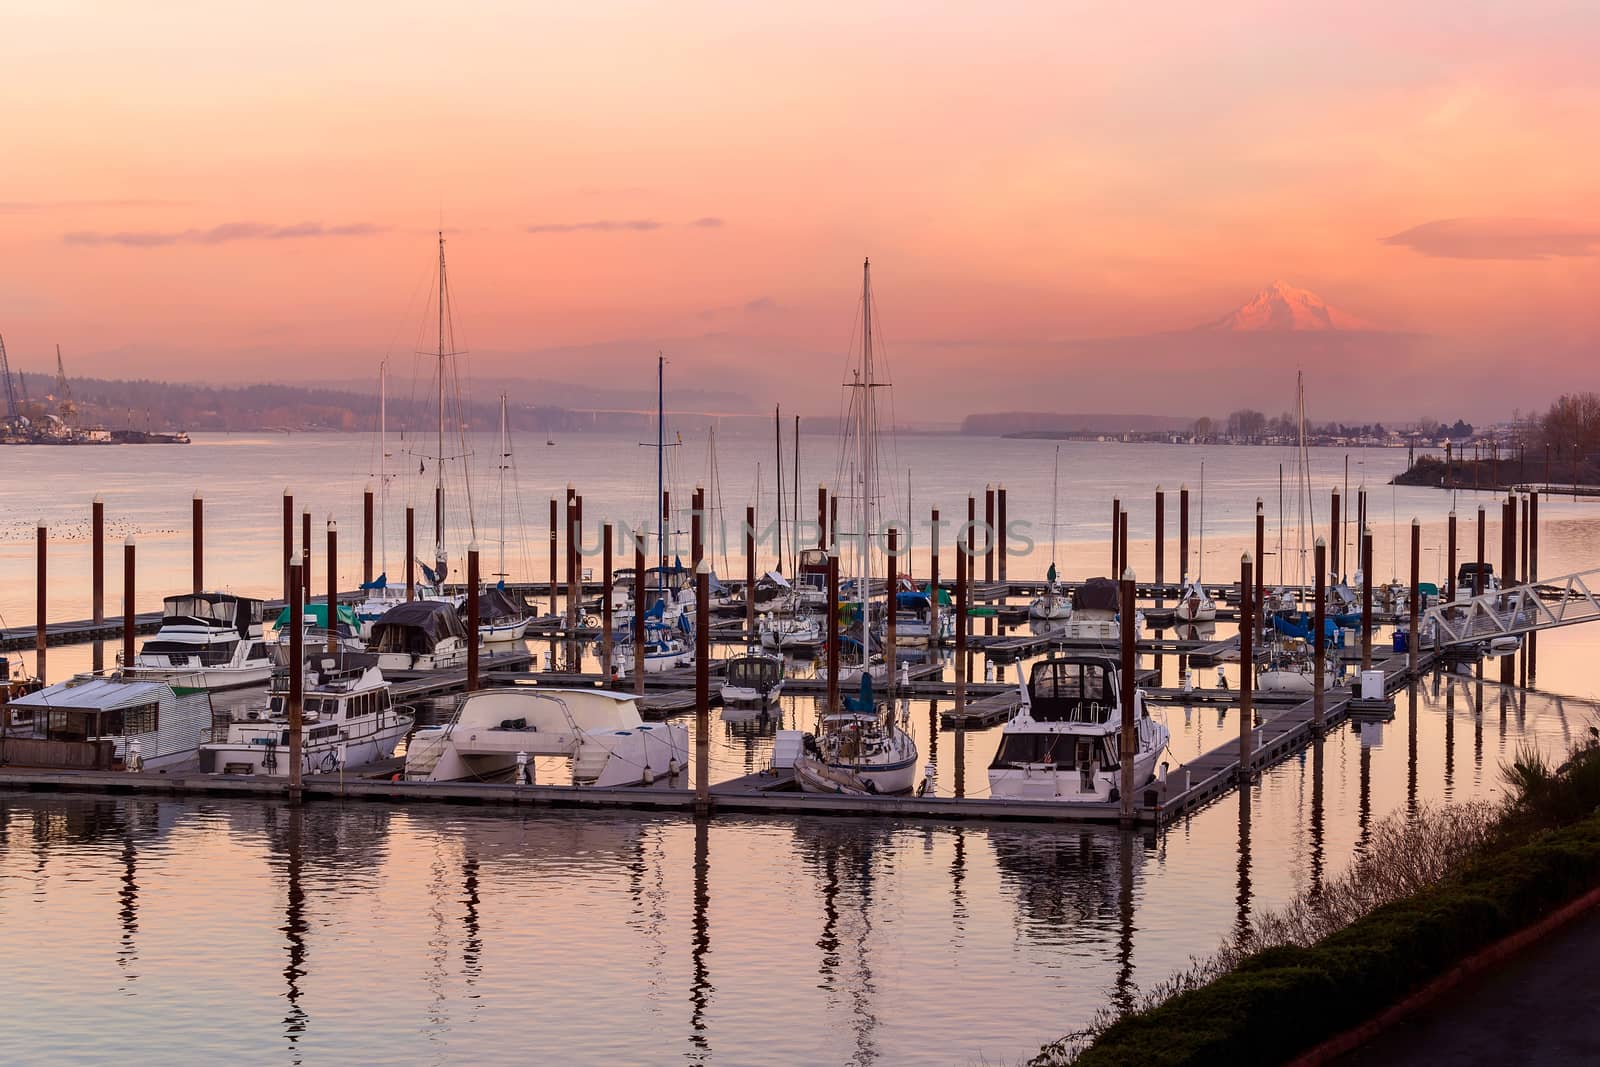 Sailboats moored at Marina along Columbia River with Mount Hood view in Oregon during sunset